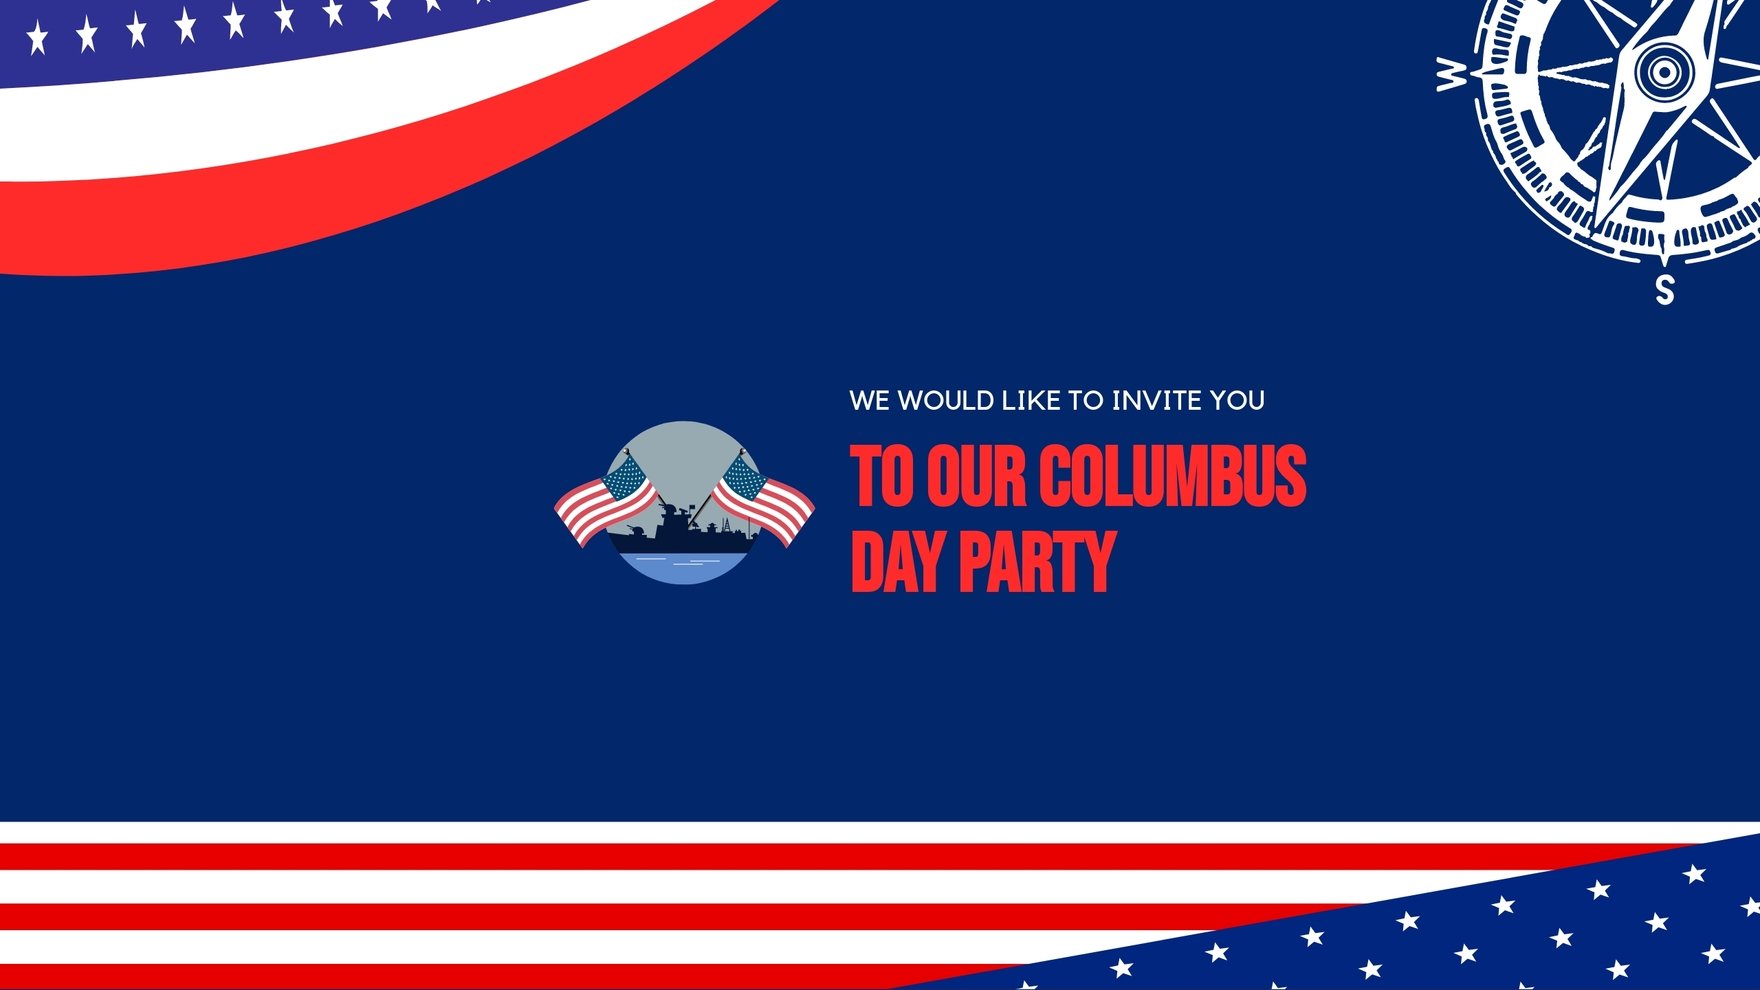 Columbus Day Party Youtube Banner Template